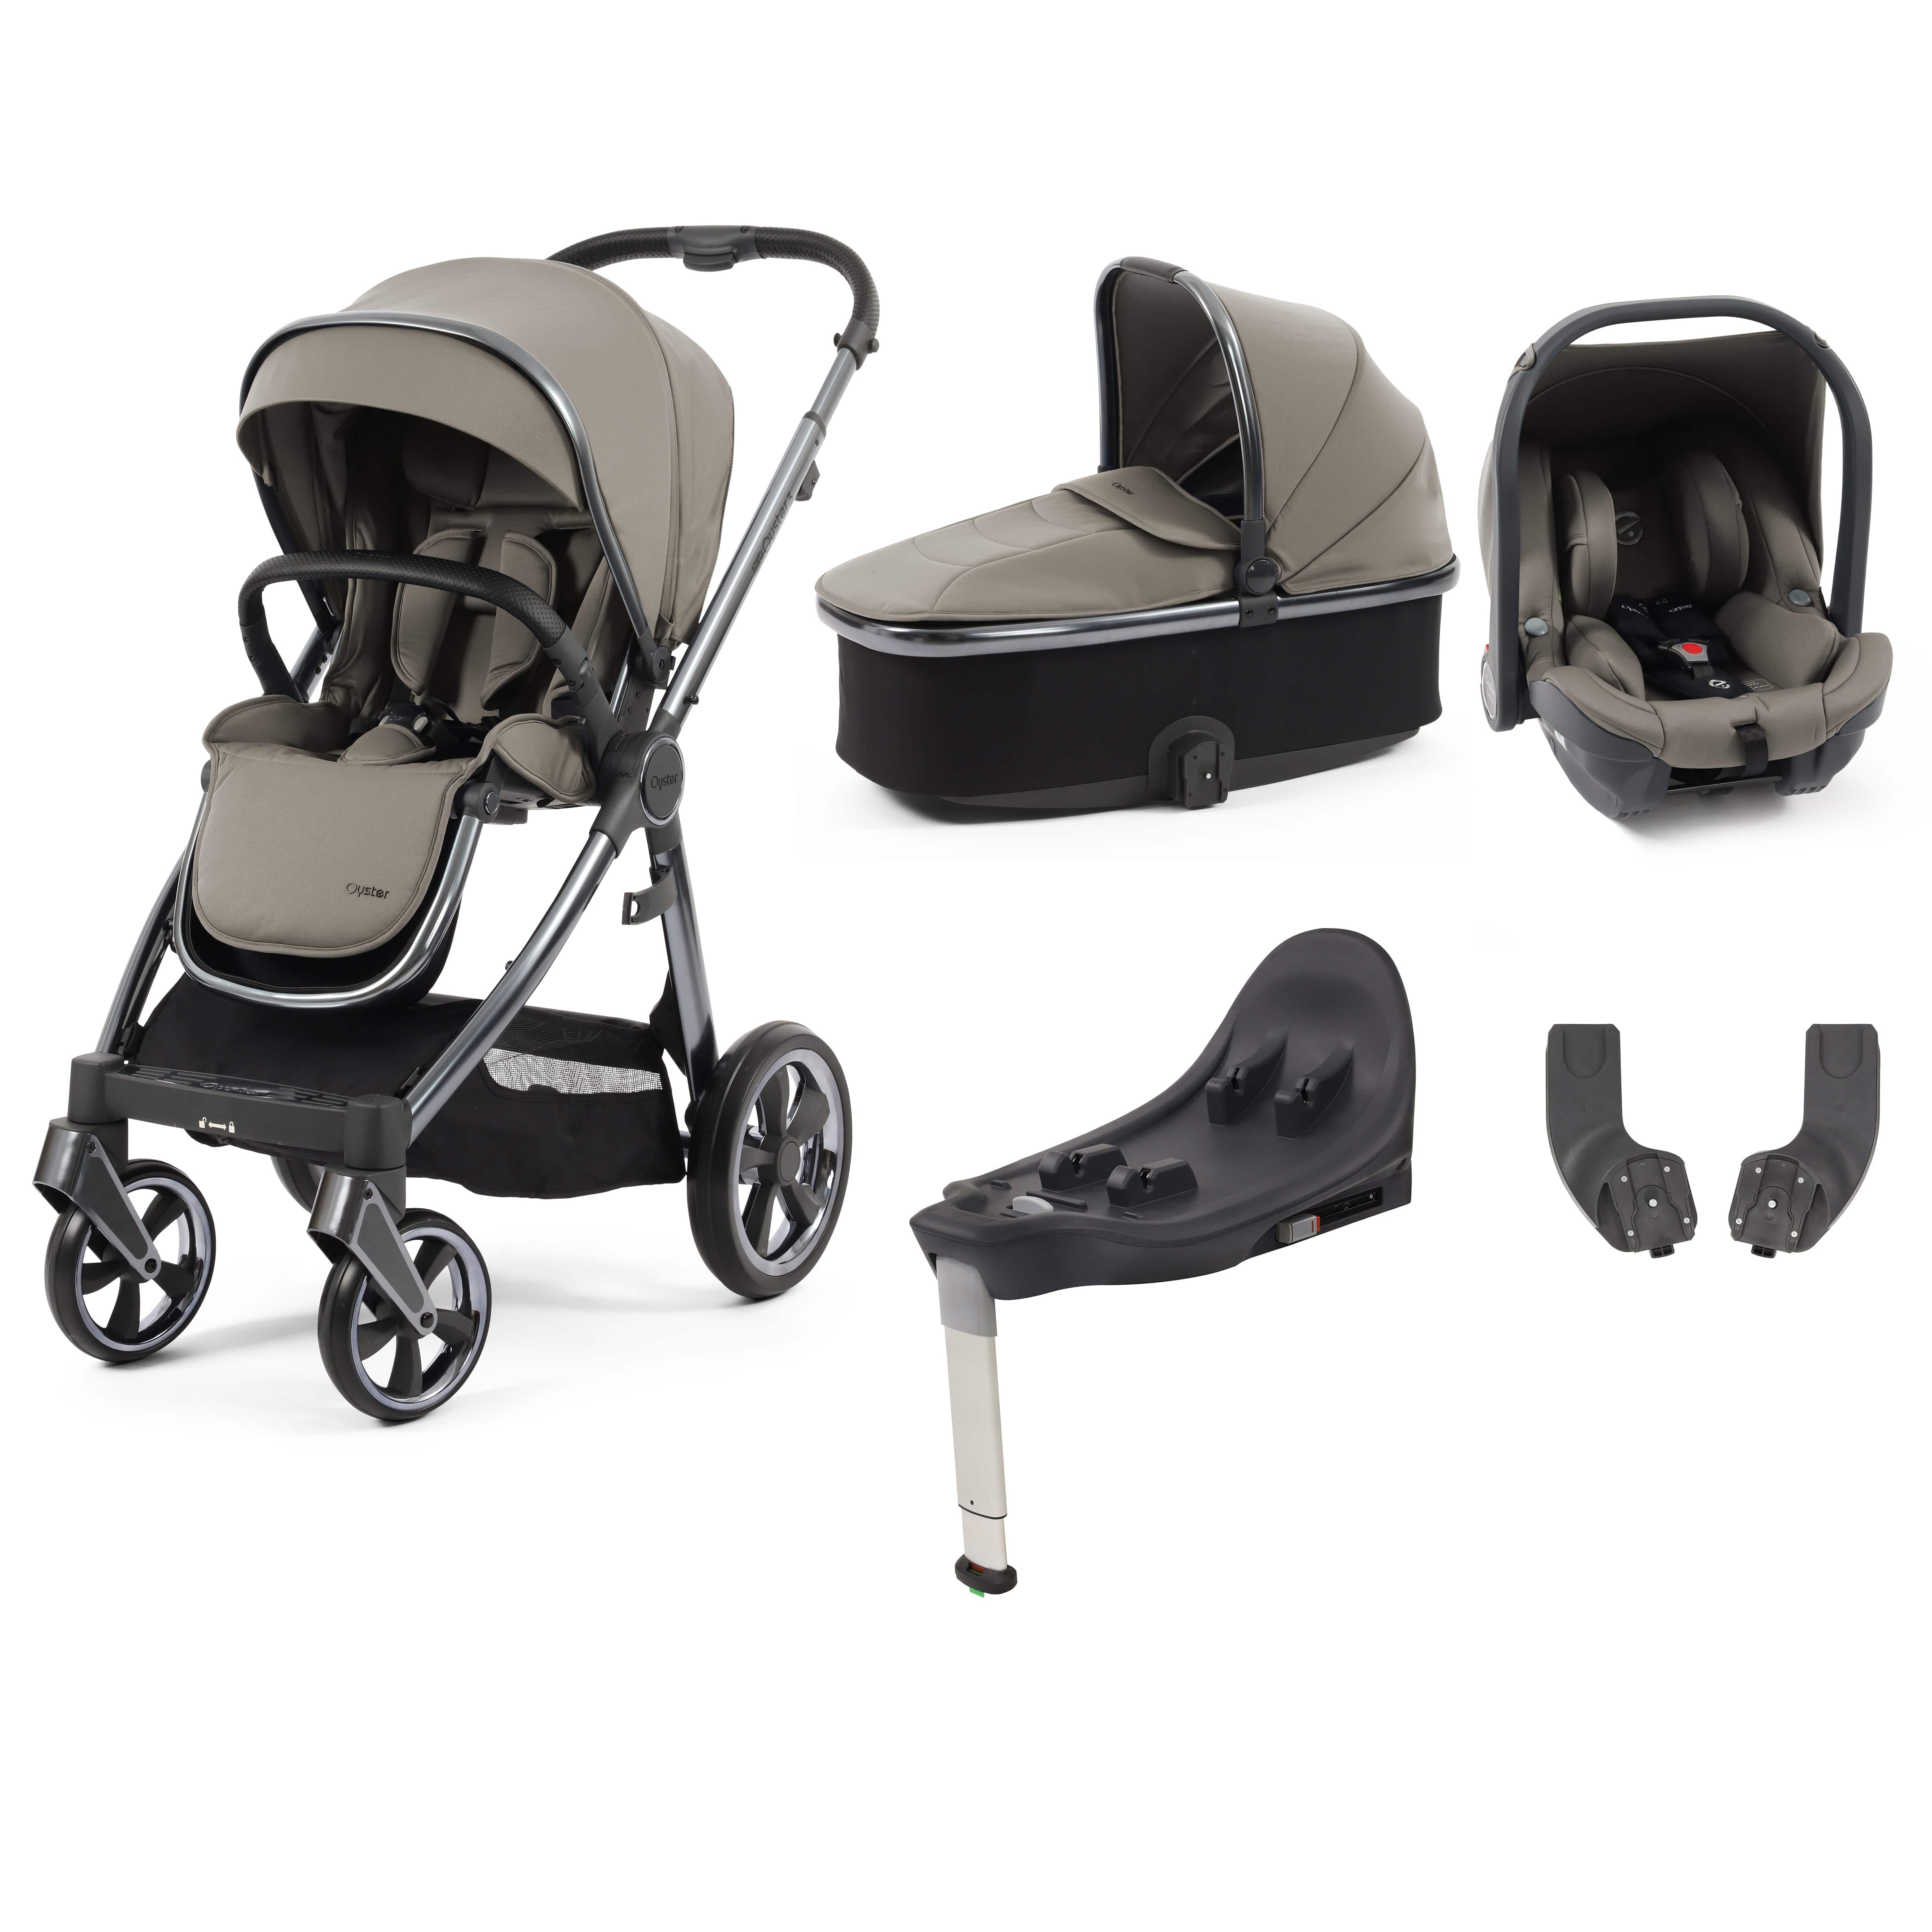 BabyStyle travel systems Babystyle Oyster 3 Essential Bundle with Car Seat - Stone 14746-STN